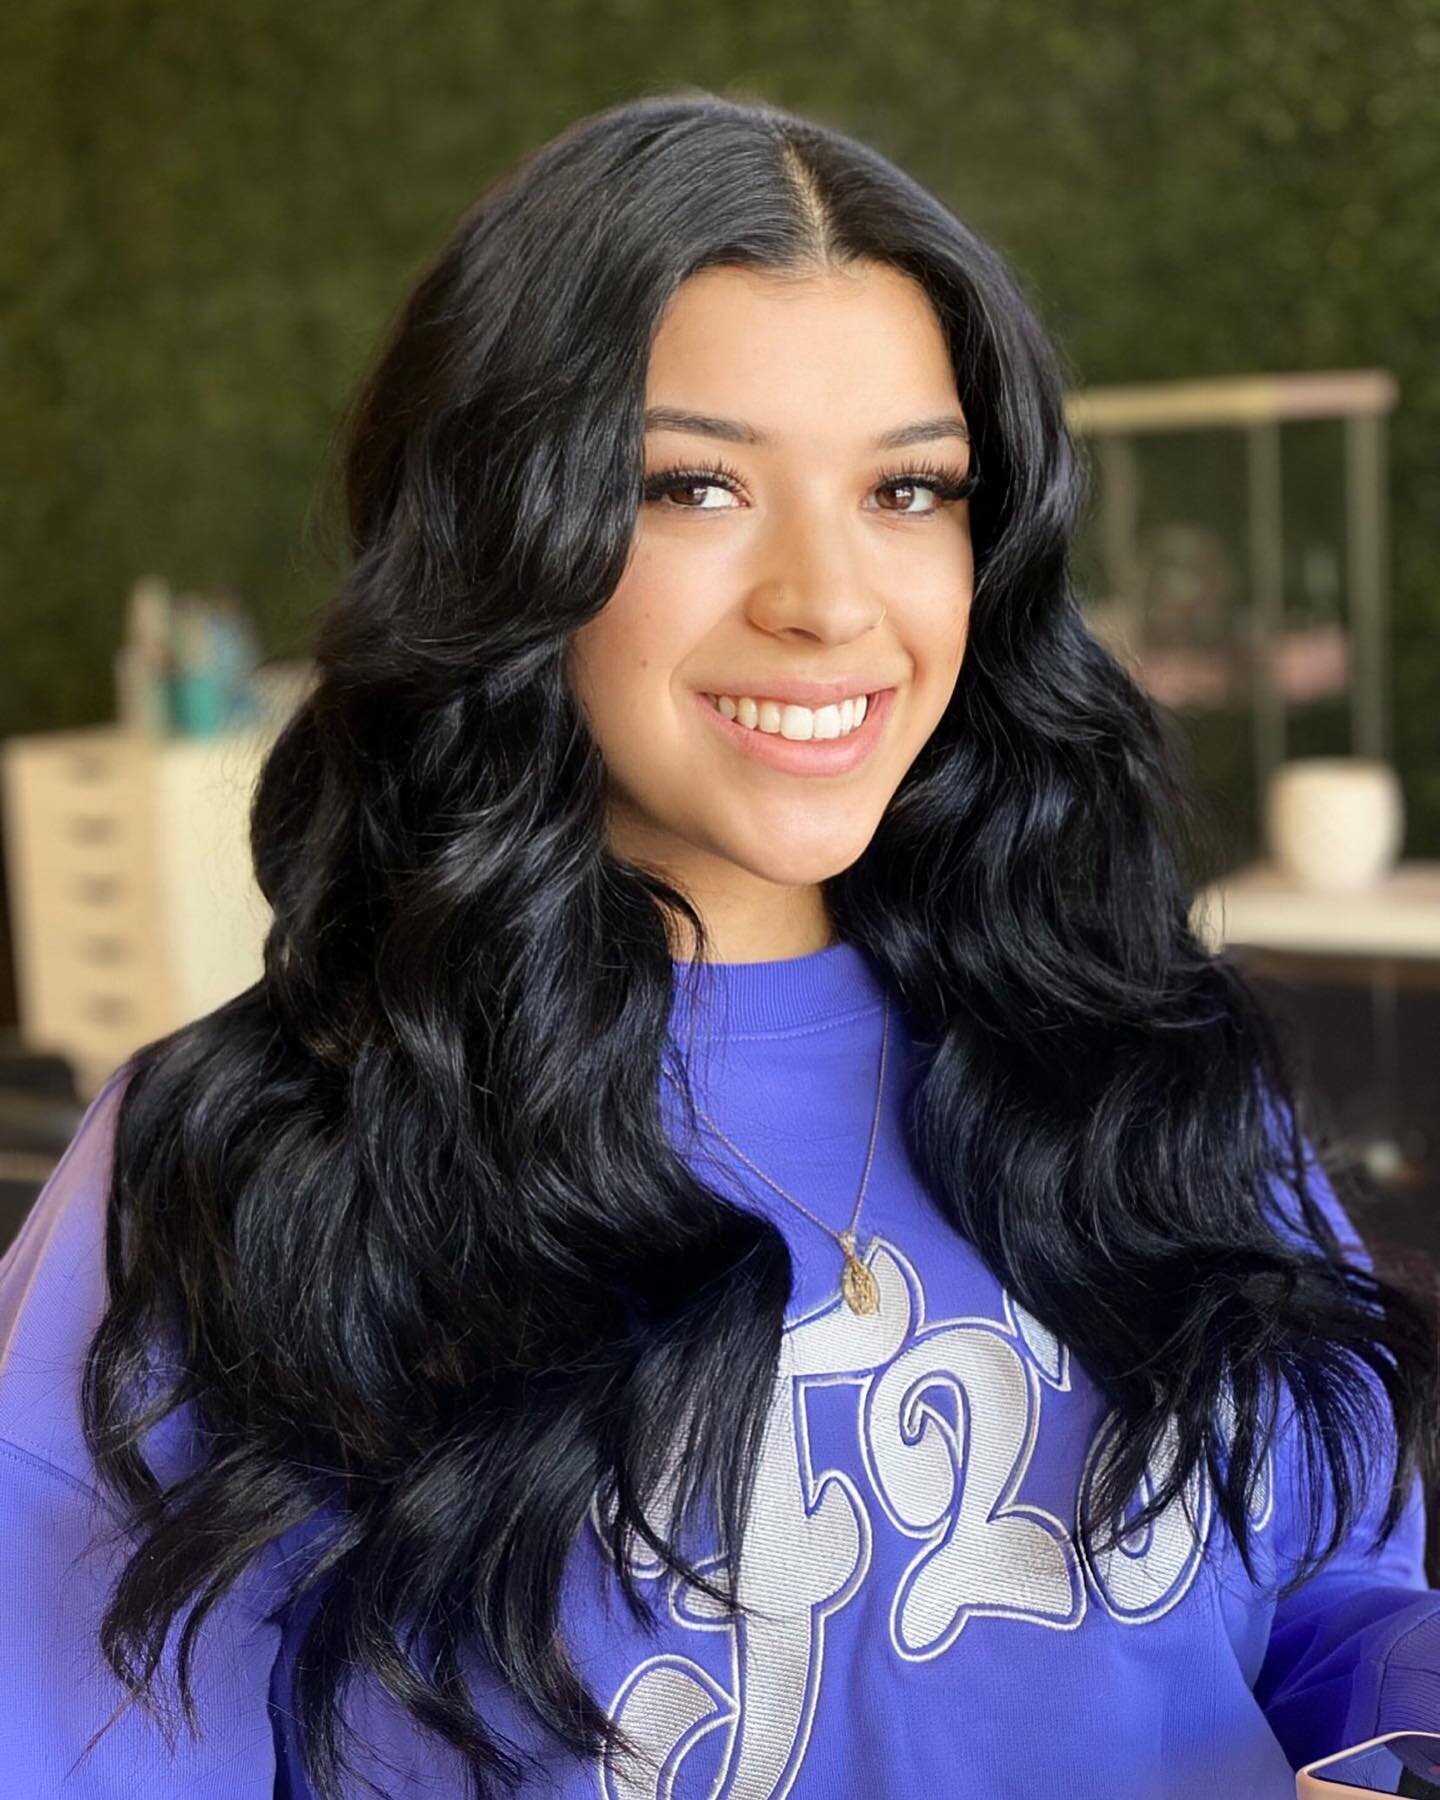 M I C R O L I N K S | on this hair baddie @_djeddy by @focusonyourcraft at #theshearstylesalon 
.
.
Appointments Available 
.
Hair can be pre ordered in salon
.
.
Questions? Send us a DM!
.
.
.
.
#microlinks#hairextensions#hairextensionspecialist#sac